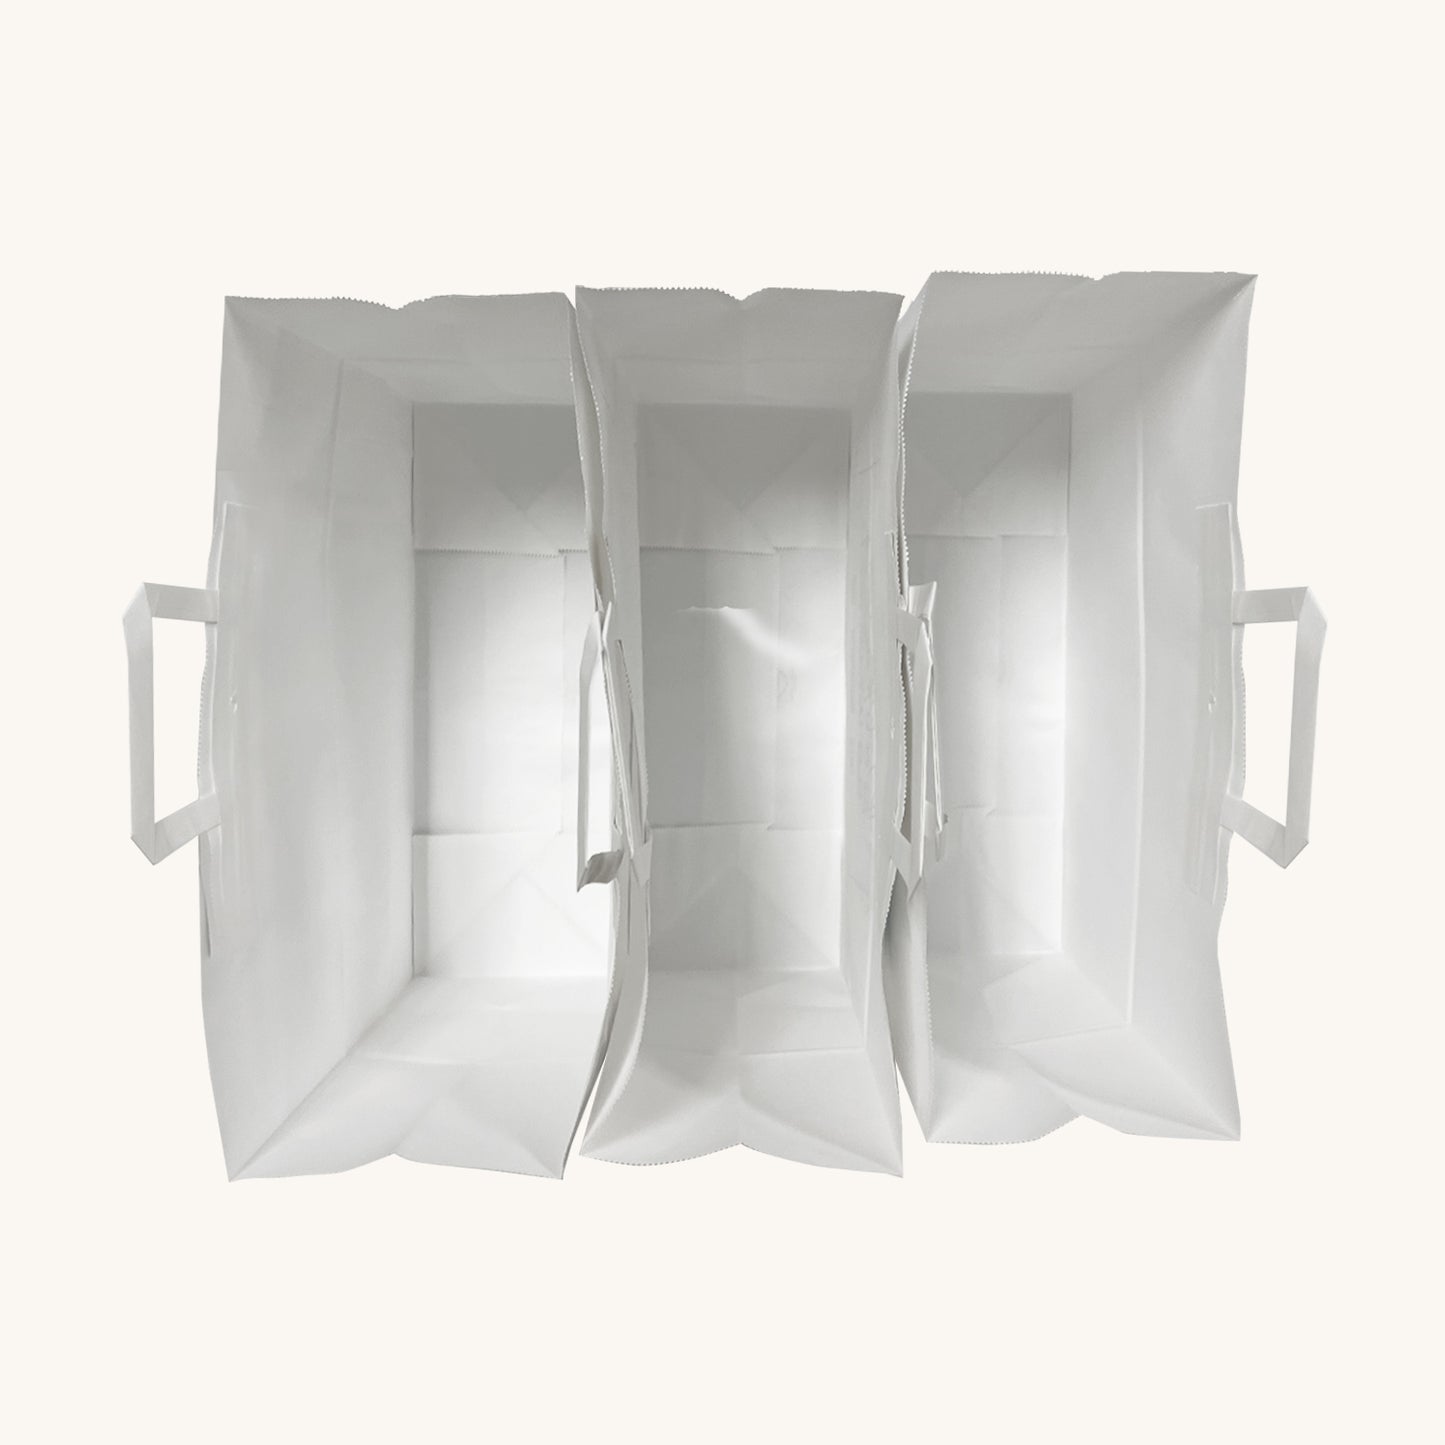 300 Pcs, Vogue, 16x6x12 inches, White Kraft Paper Bags, with Flat Handles